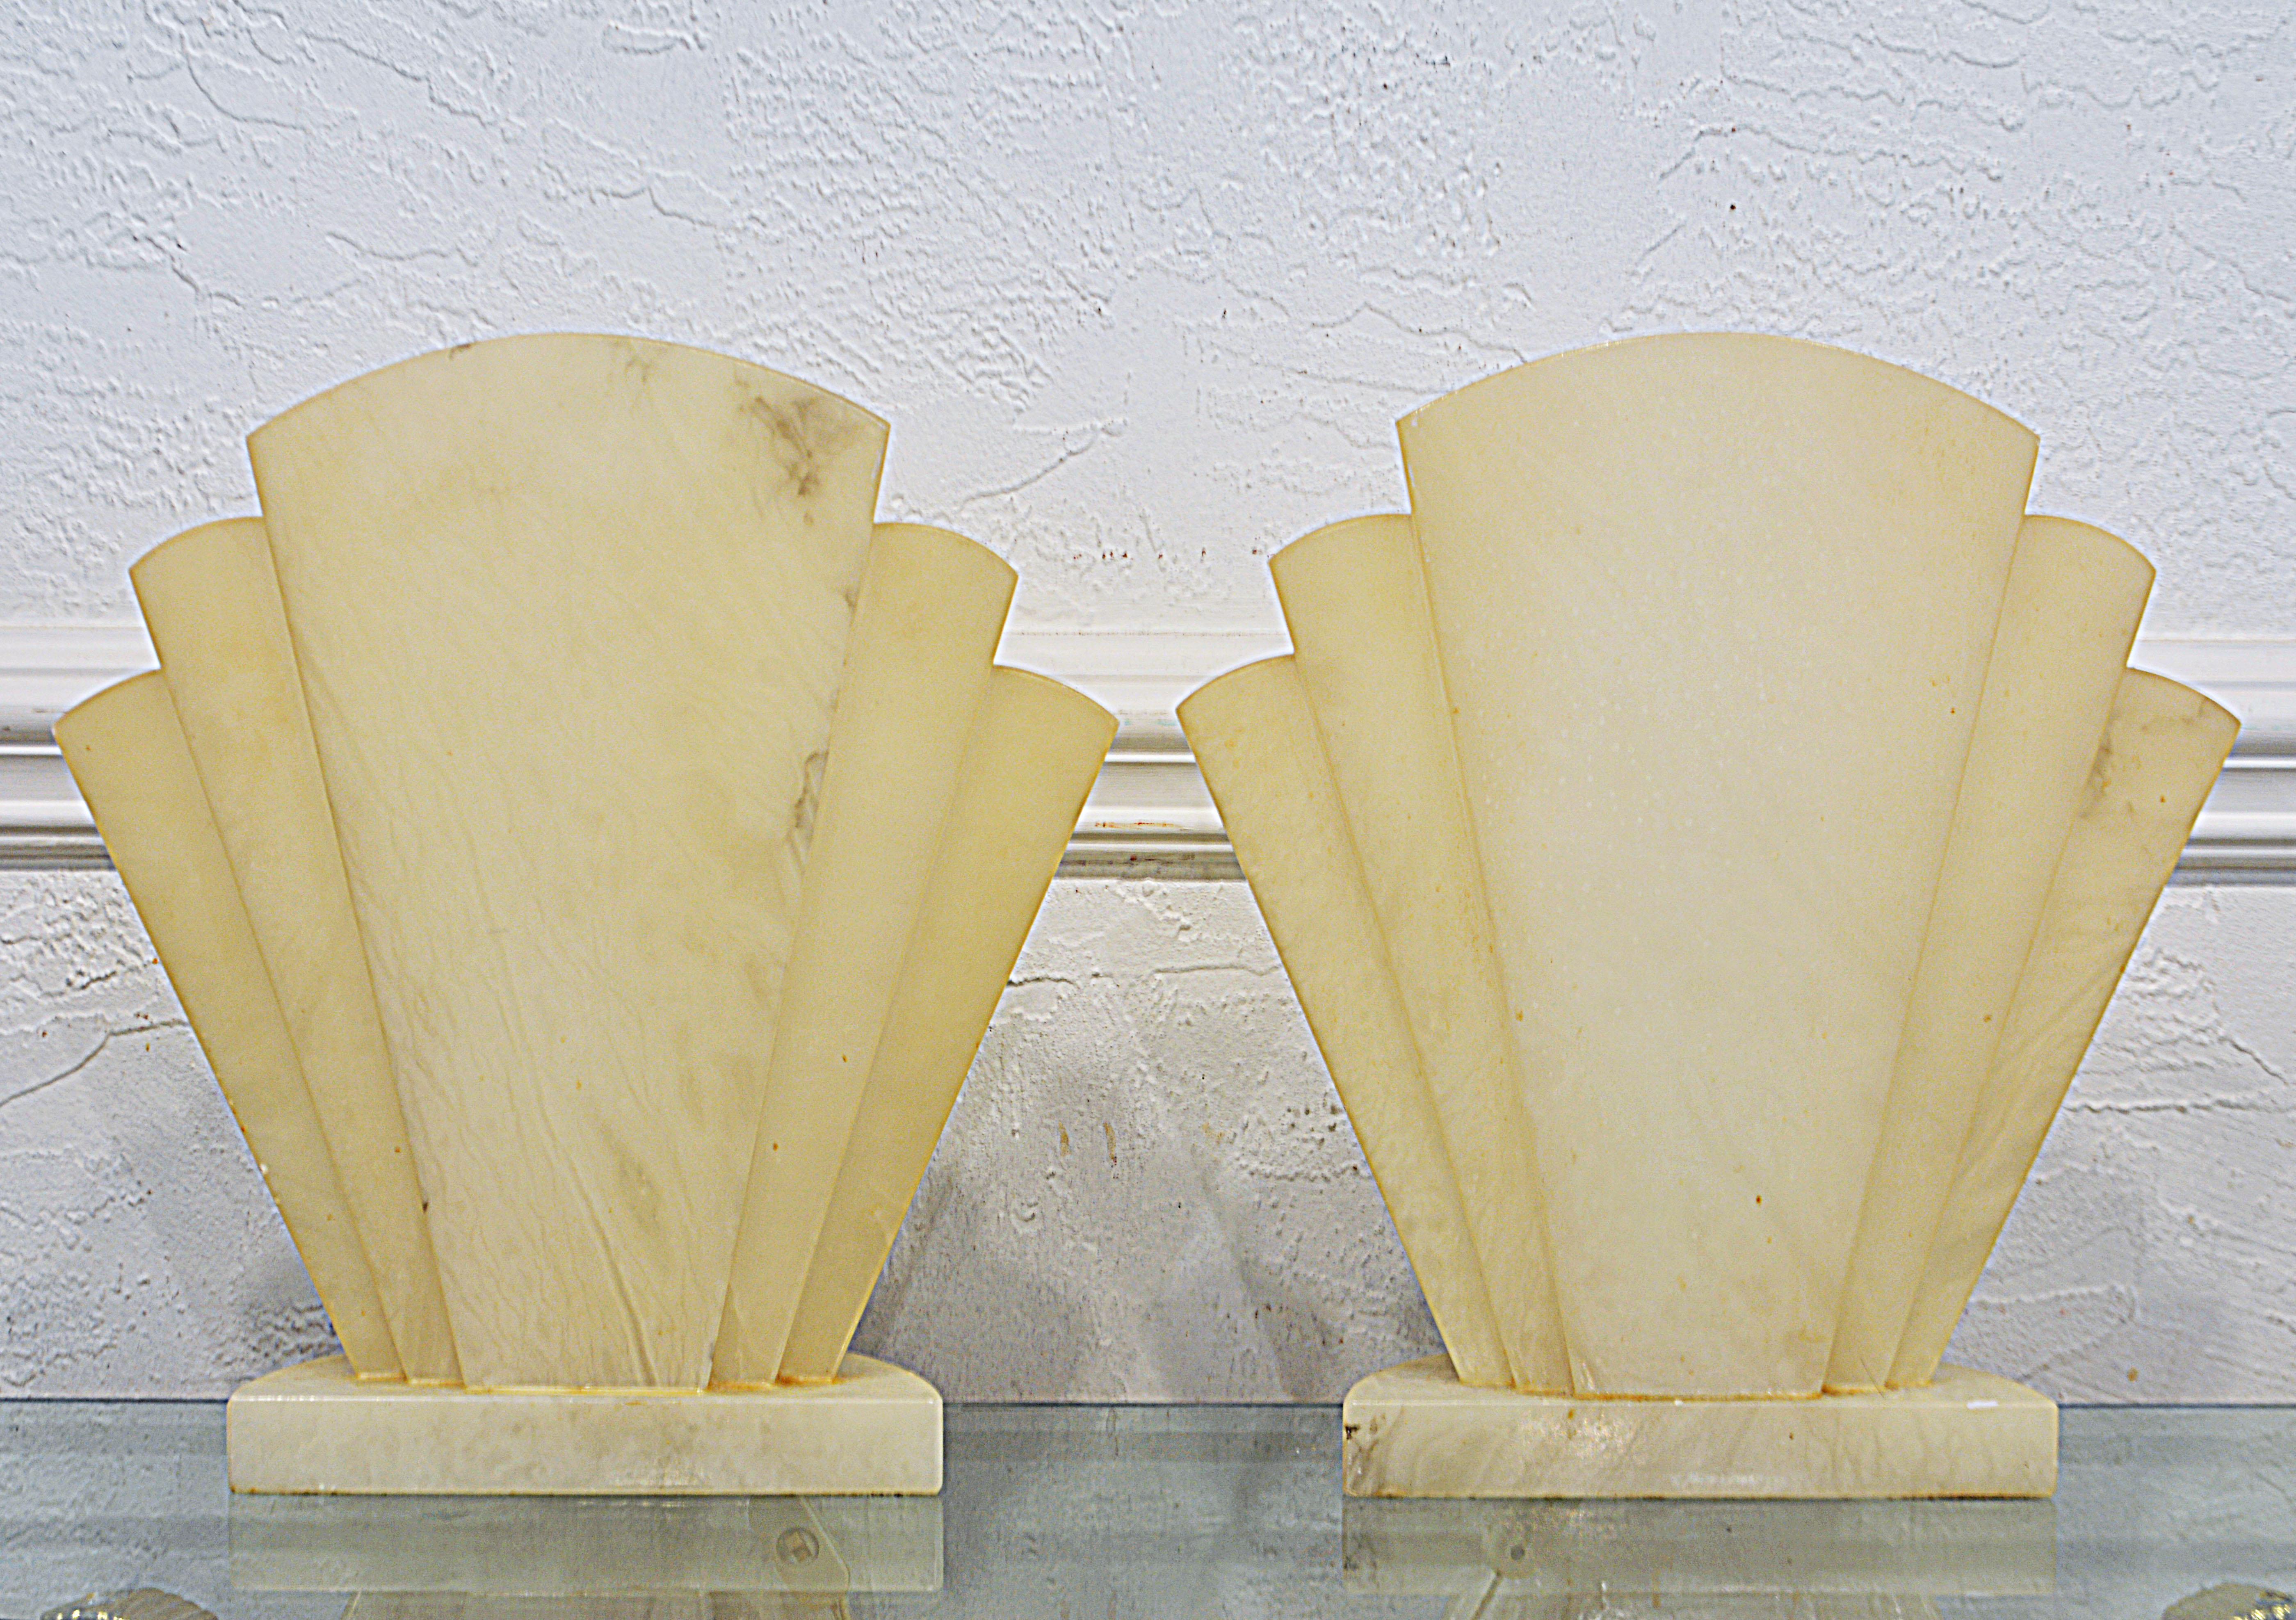 This pair of Art Deco style alabaster fan shape lamps reflects the essence of art deco. Branded with a Scaglione label, the alabaster is top quality. When lit they add an element of glamour to the surroundings.